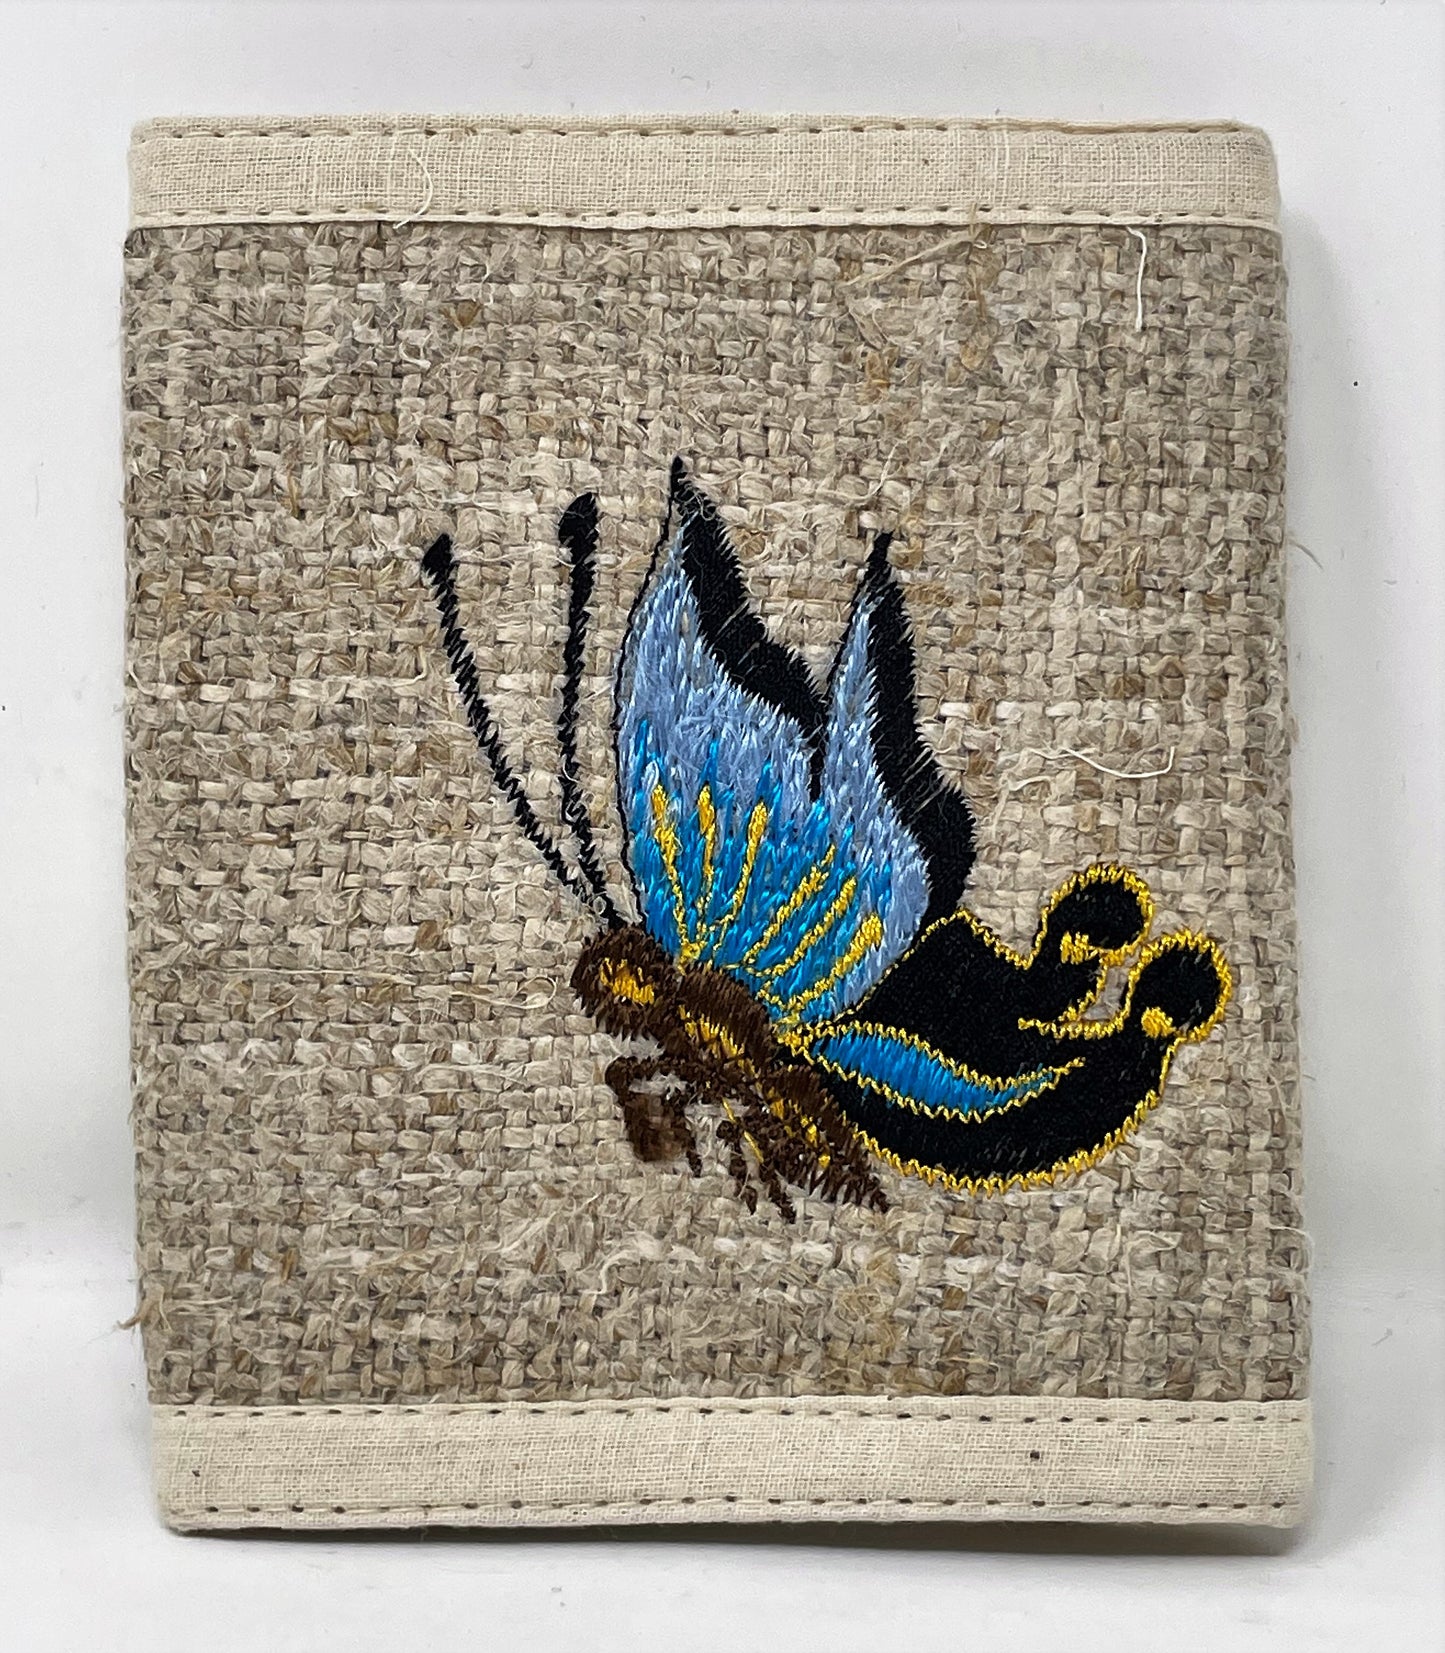 Handmade 100% Hemp Wallet with Embroidered Butterfly Design